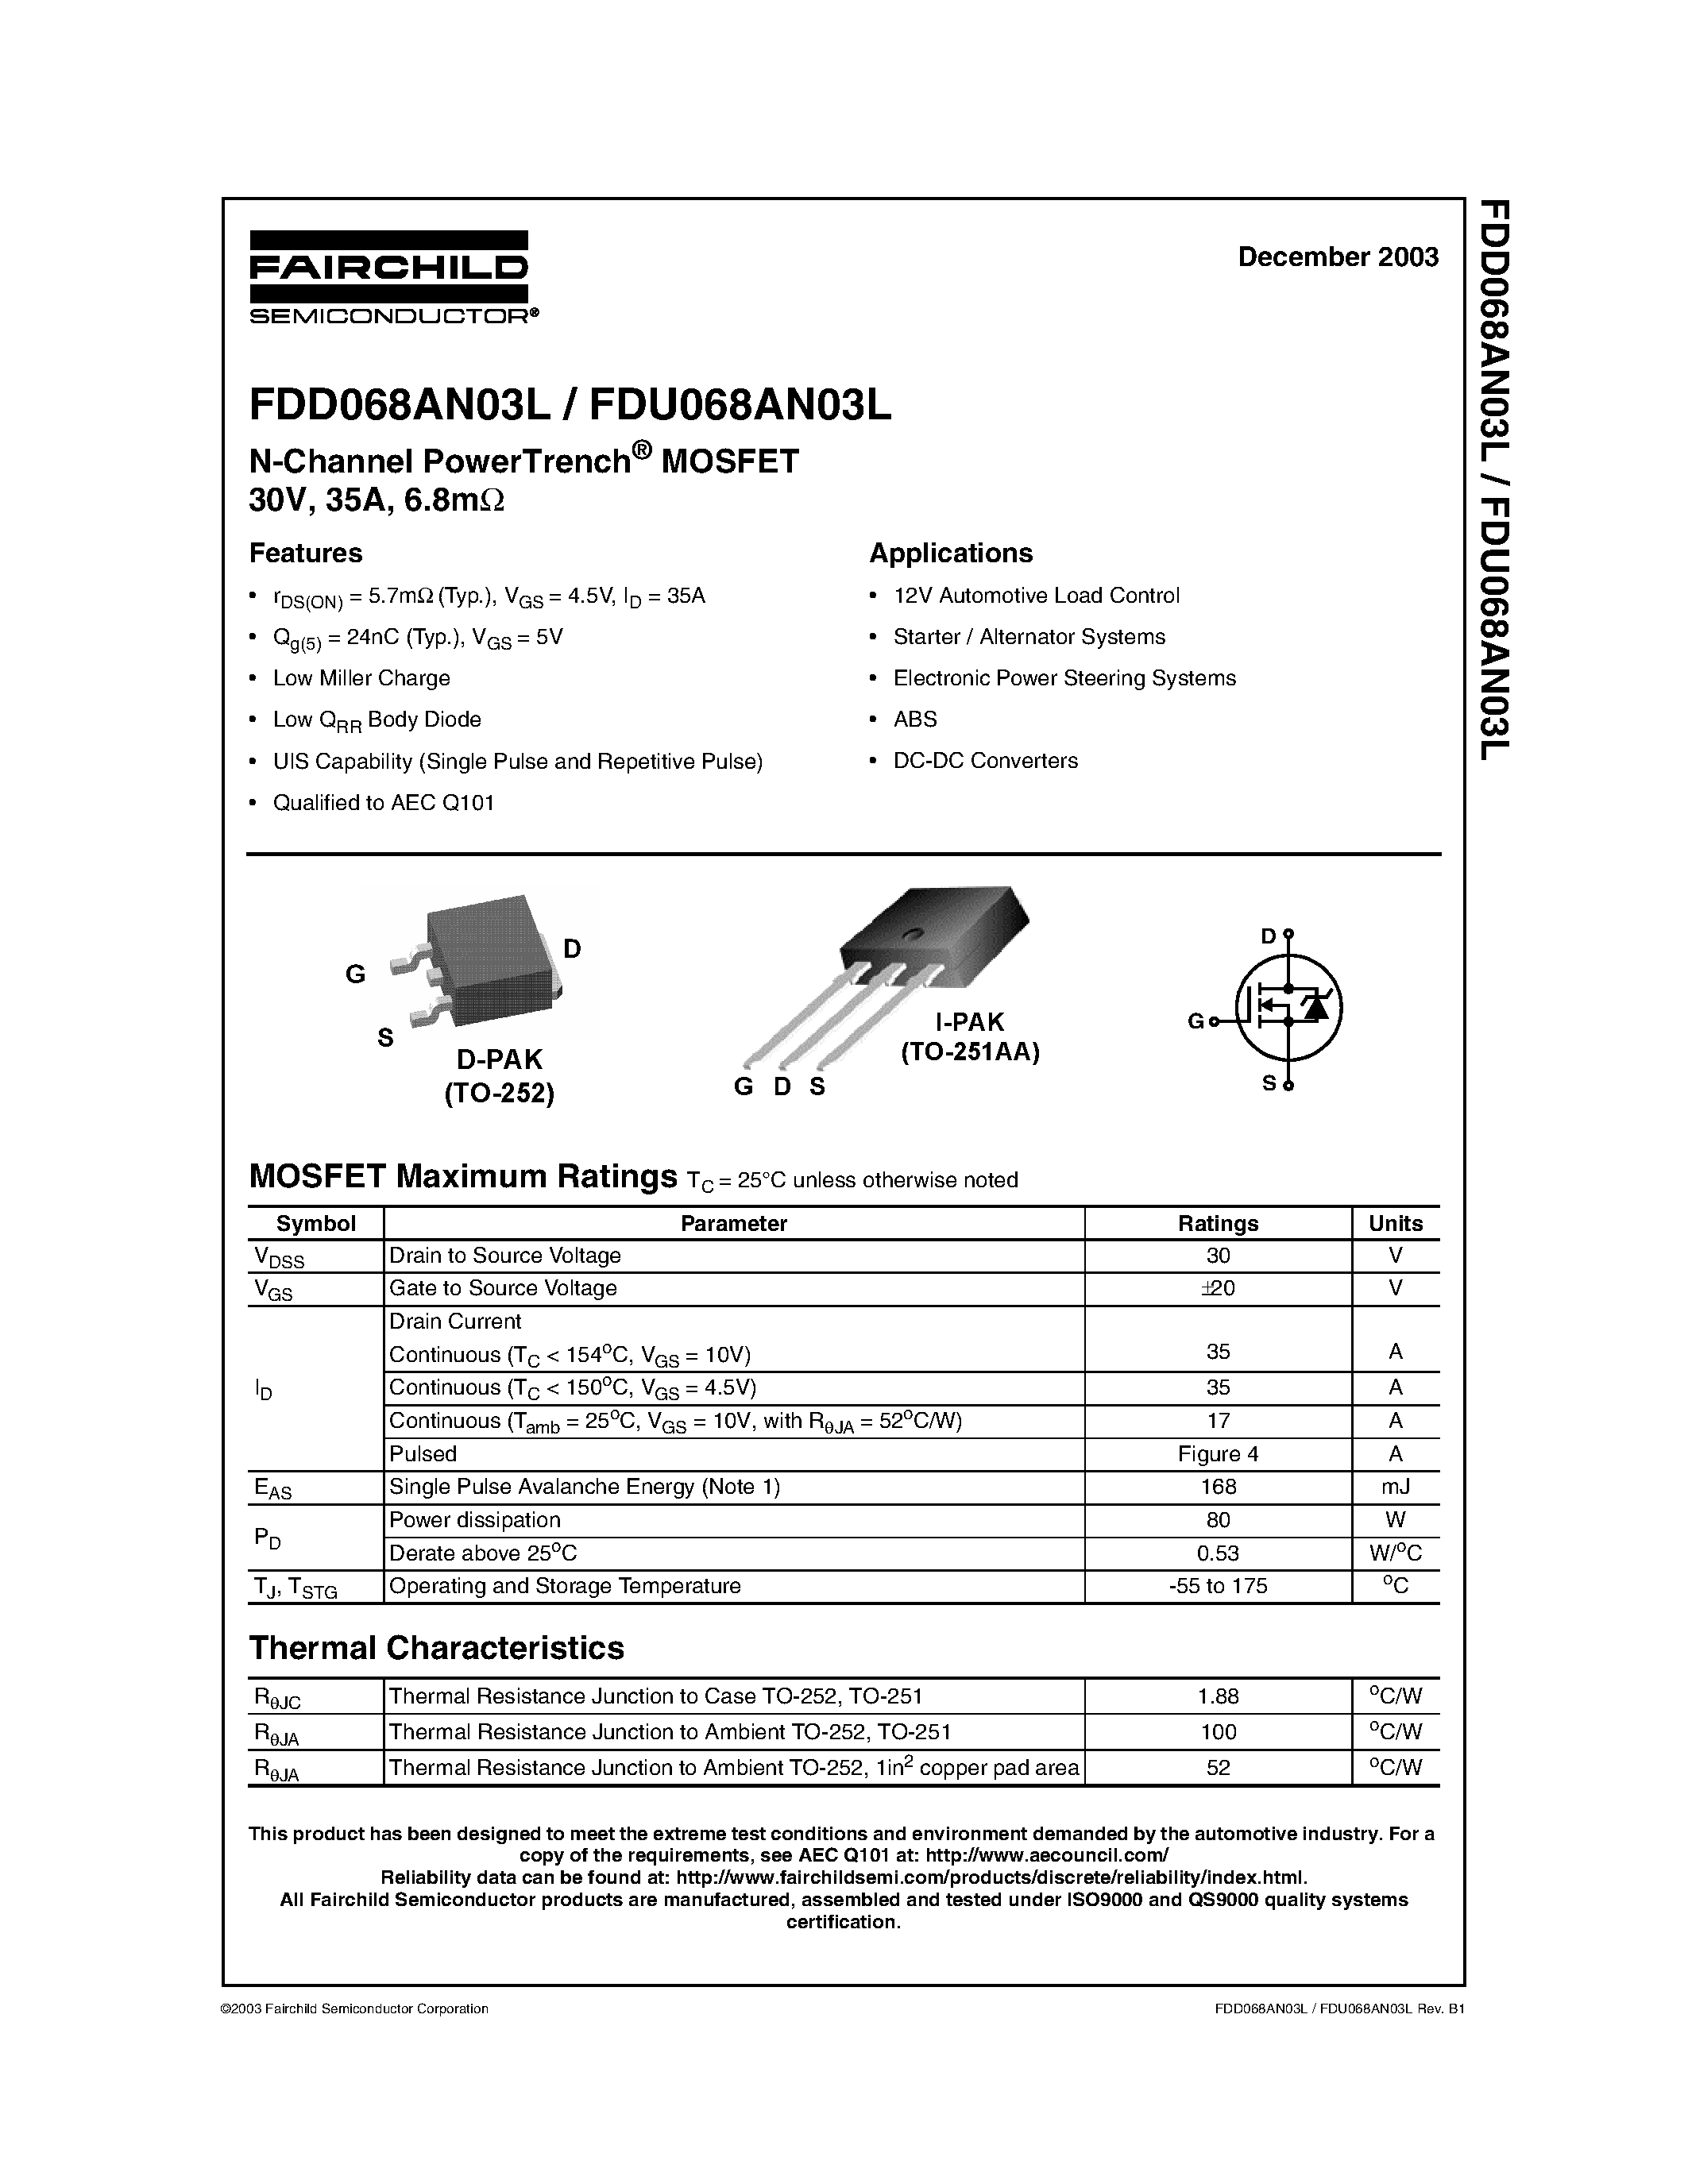 Datasheet FDD068AN03 - N-Channel PowerTrench MOSFET 30V/ 35A/ 6.8m page 1